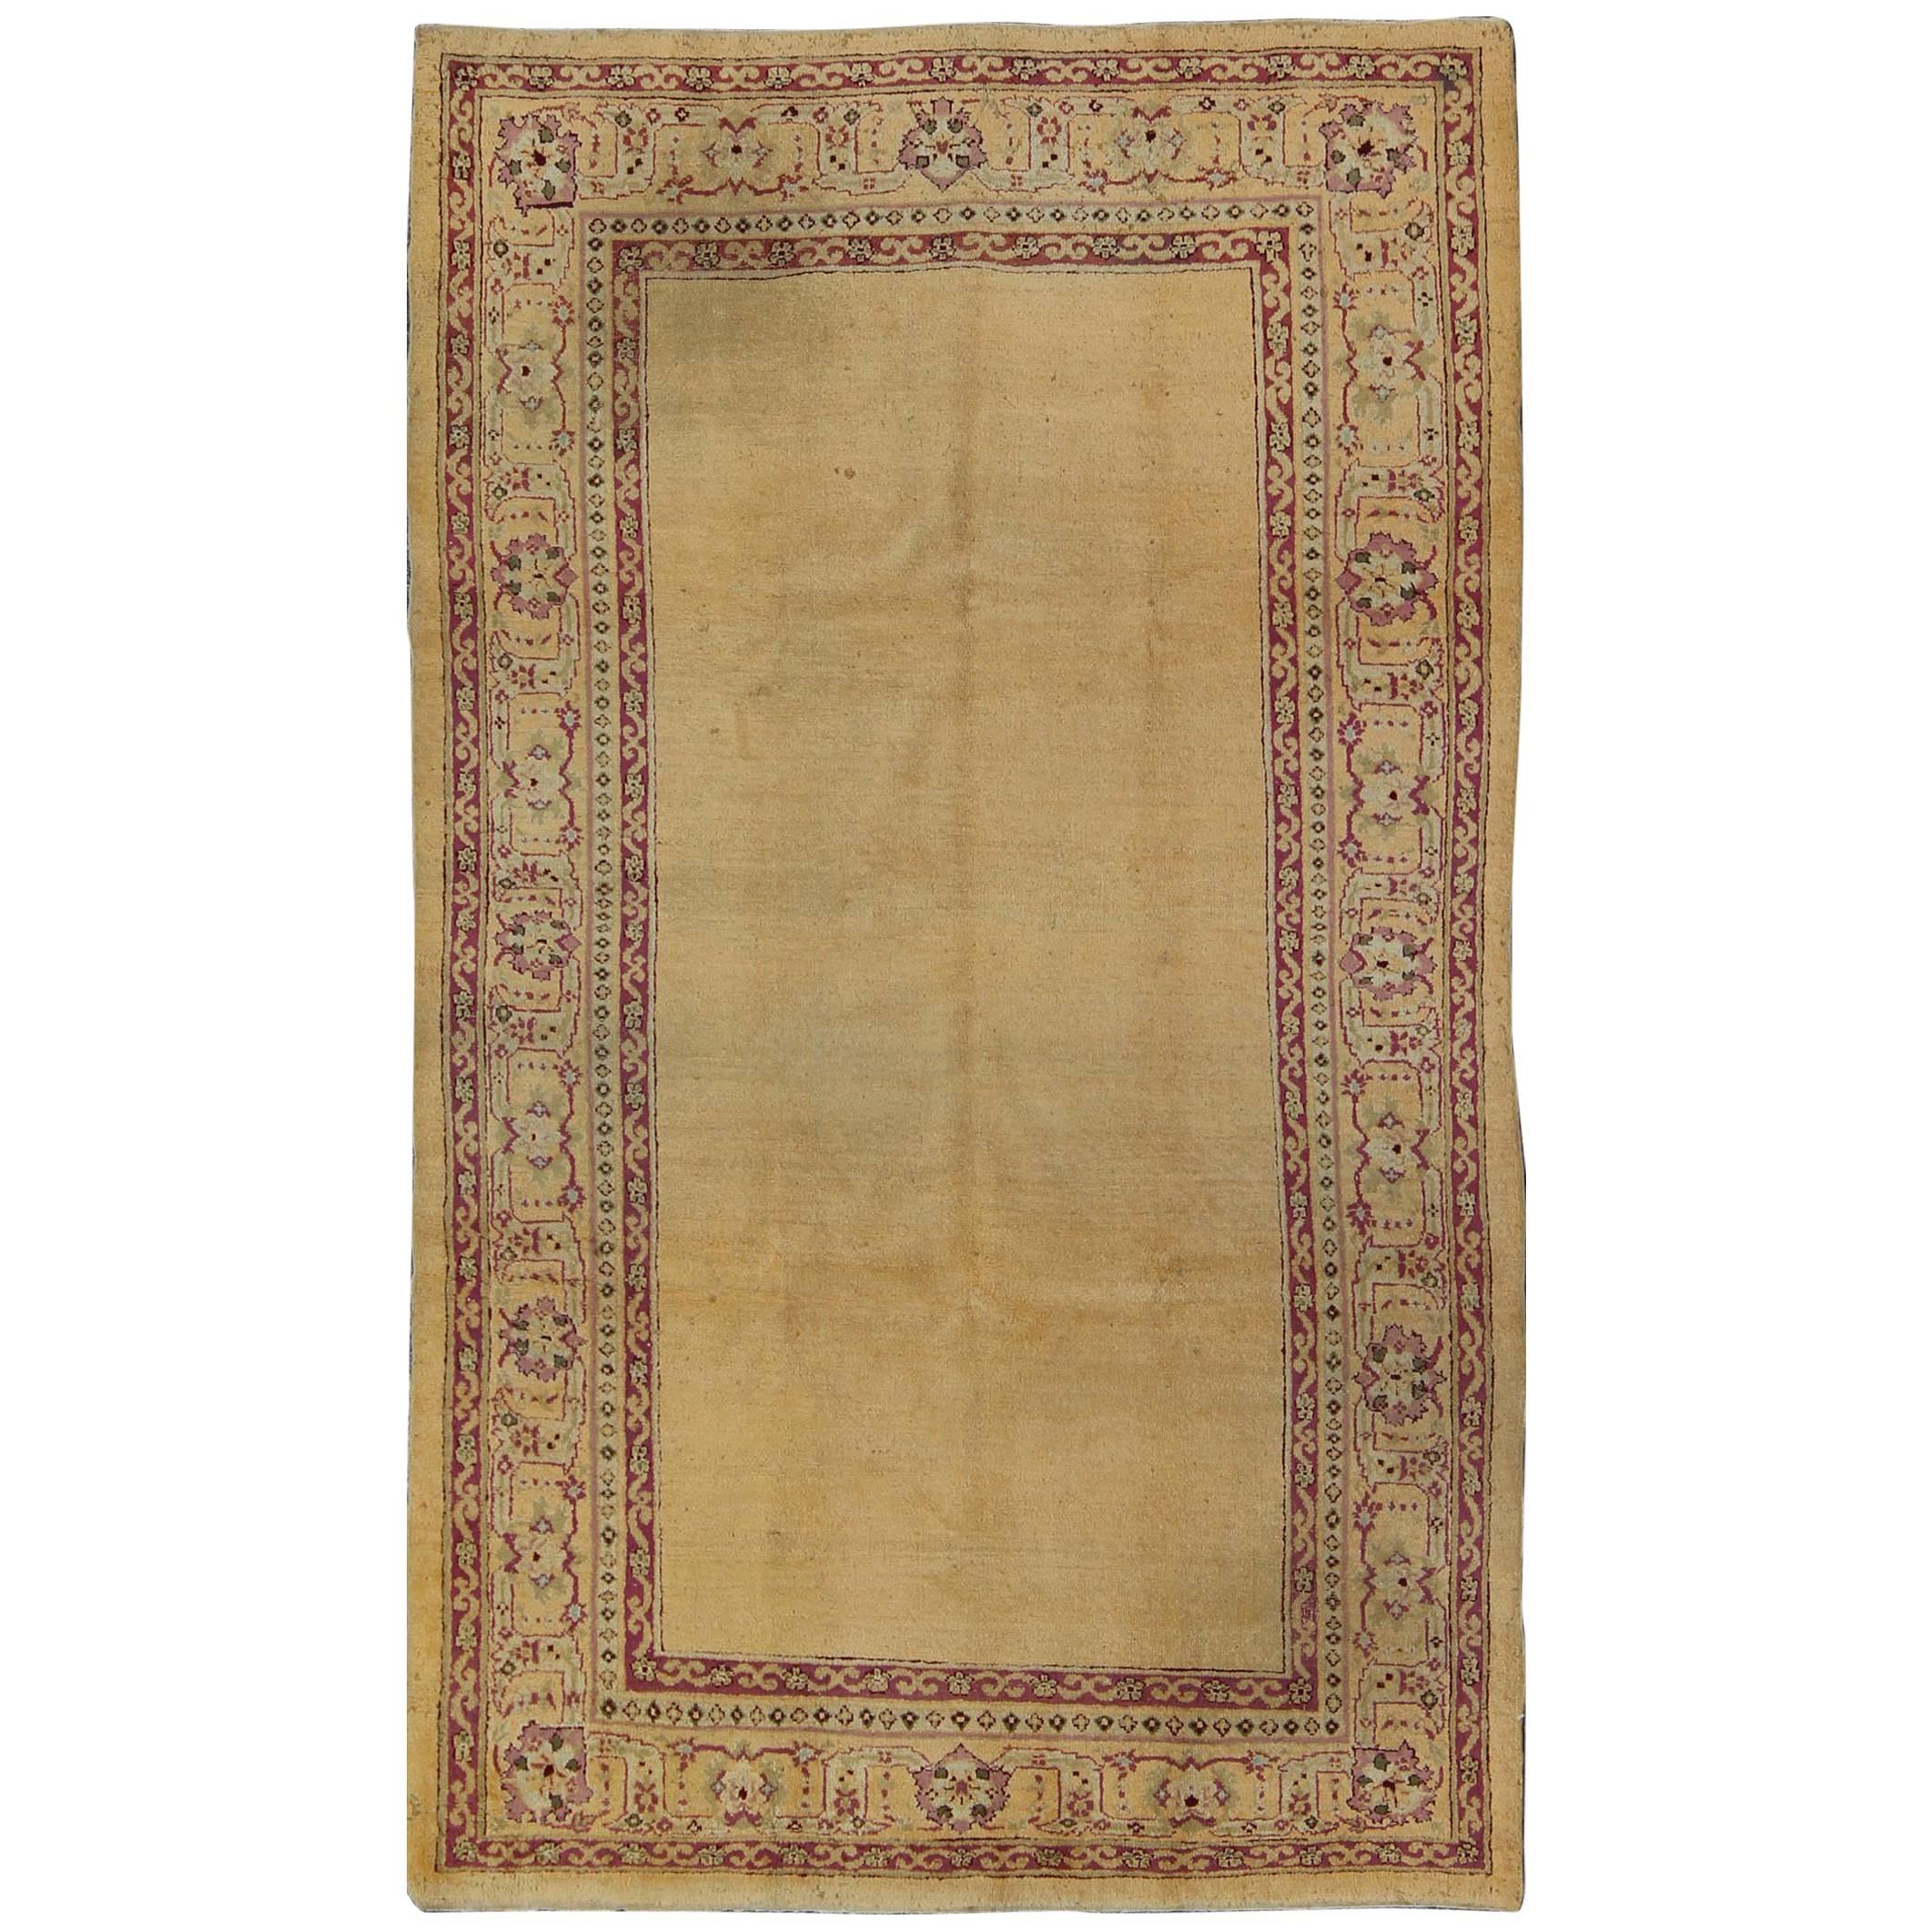 Antique Indian Amritsar Rug with Cream Background, Red & Lavender Border